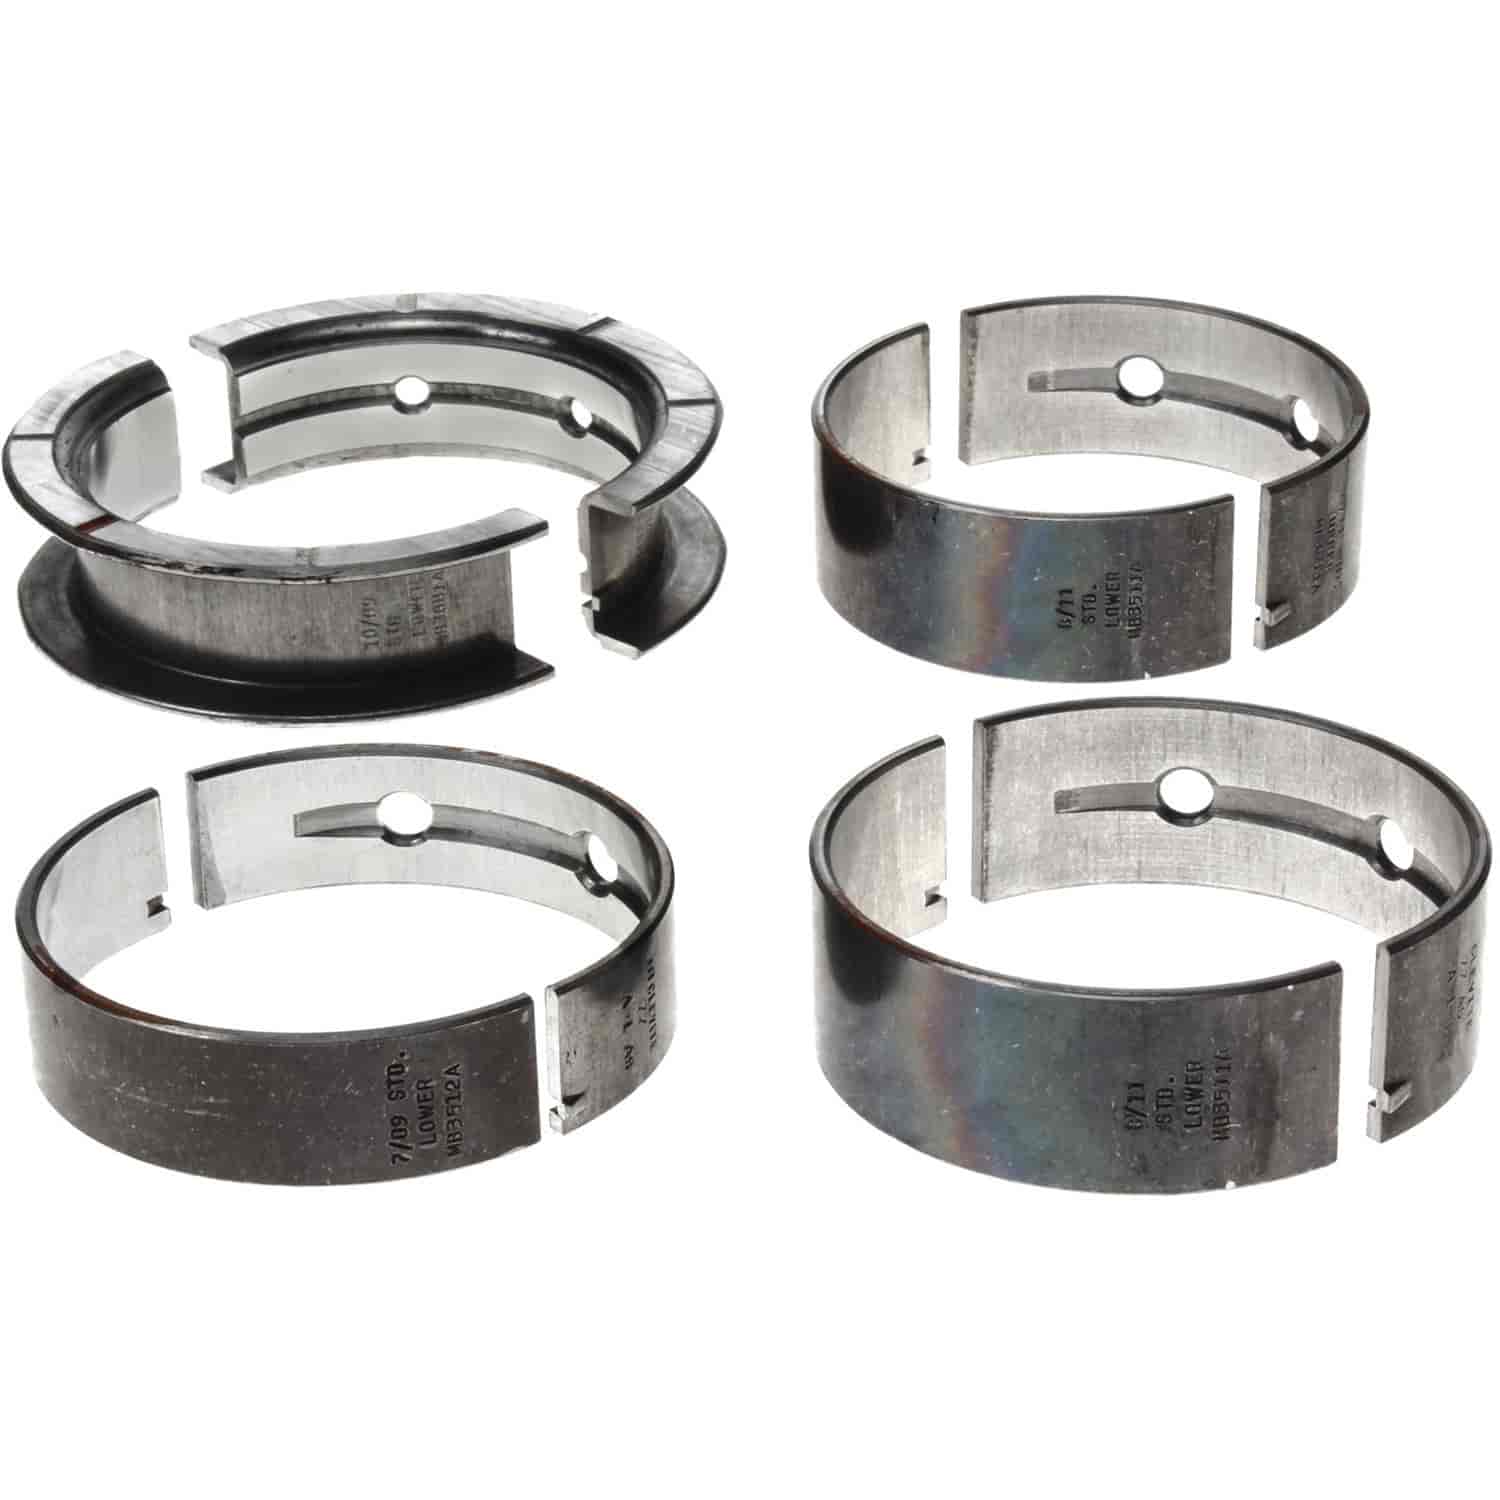 Main Bearing Set Chevy 1985-2009 V6 2.8/3.1/3.4L with Standard Size